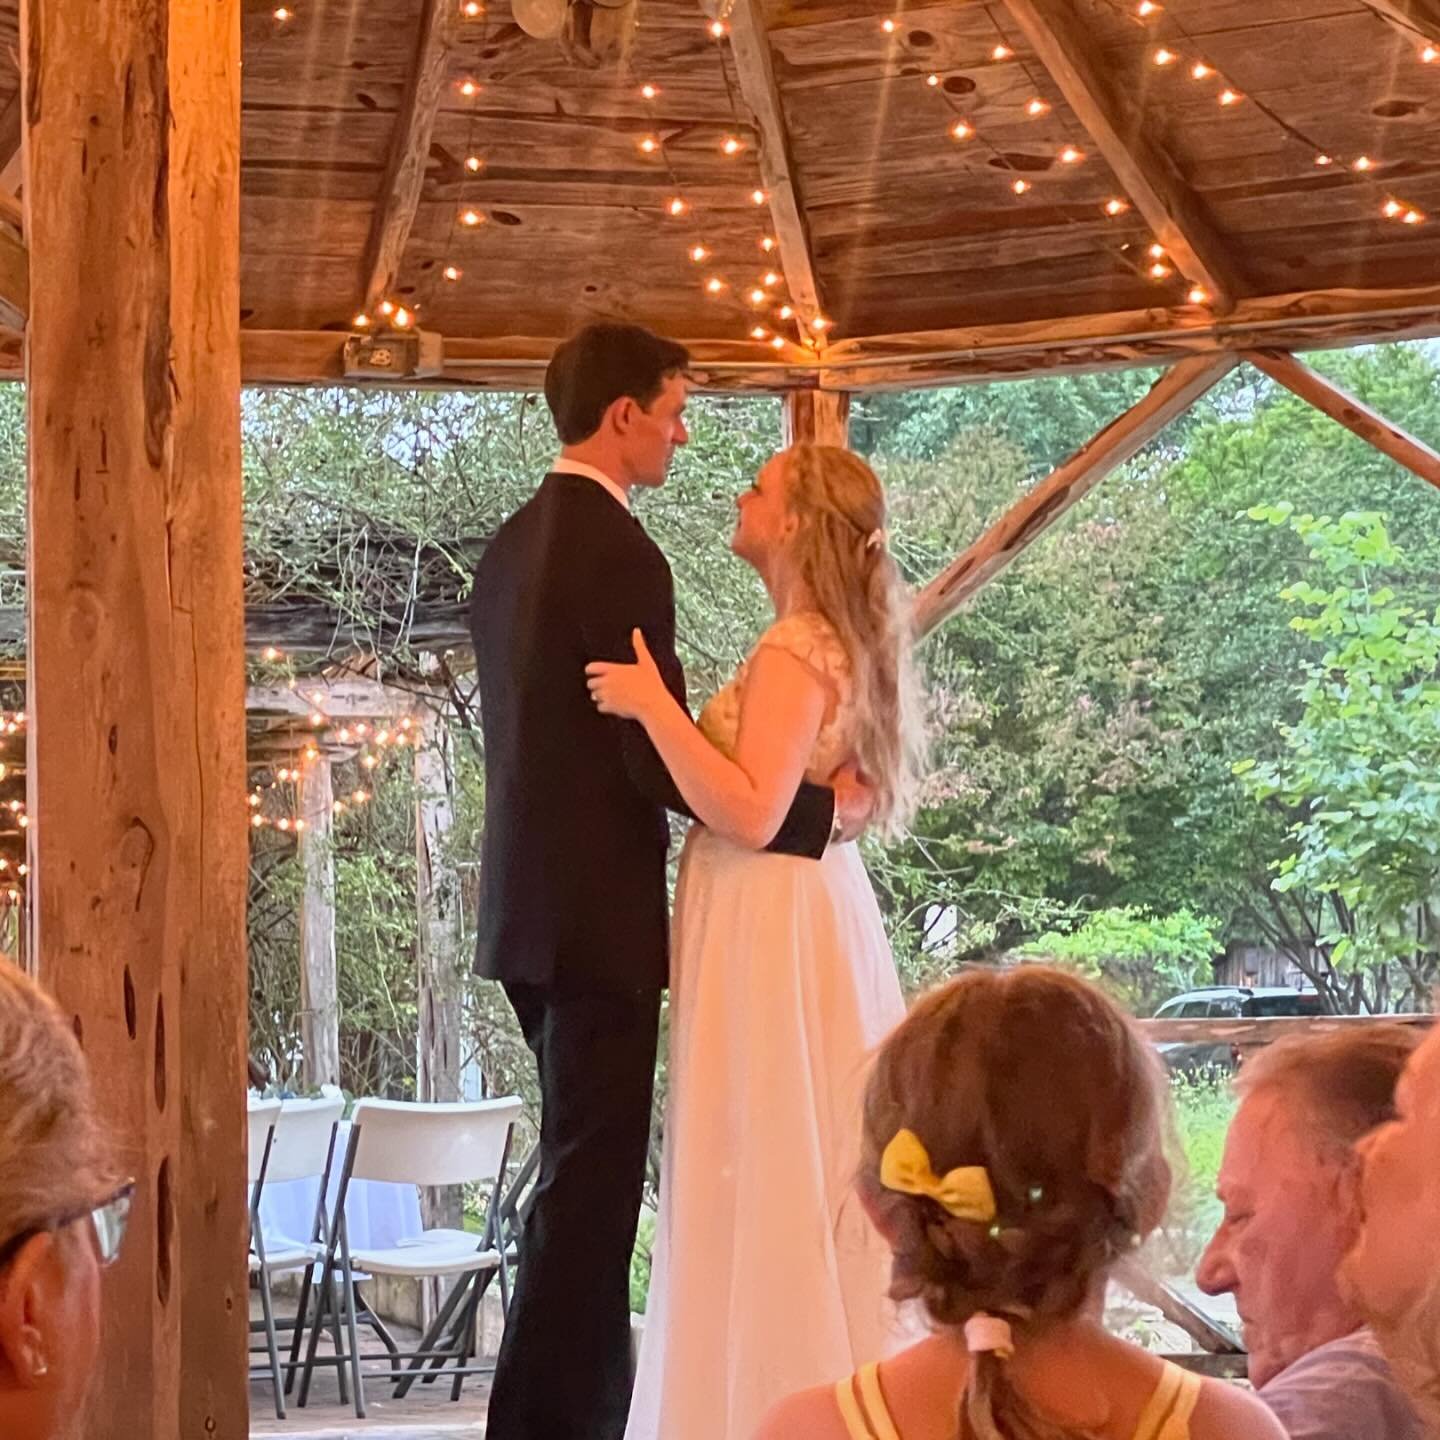 We had a wonderful weekend as a family celebrating the union of my beautiful niece, @elizxmarieh and her new husband, Chase.

Congratulations Elizabeth, Chase, and Joanne too! May your family be blessed!